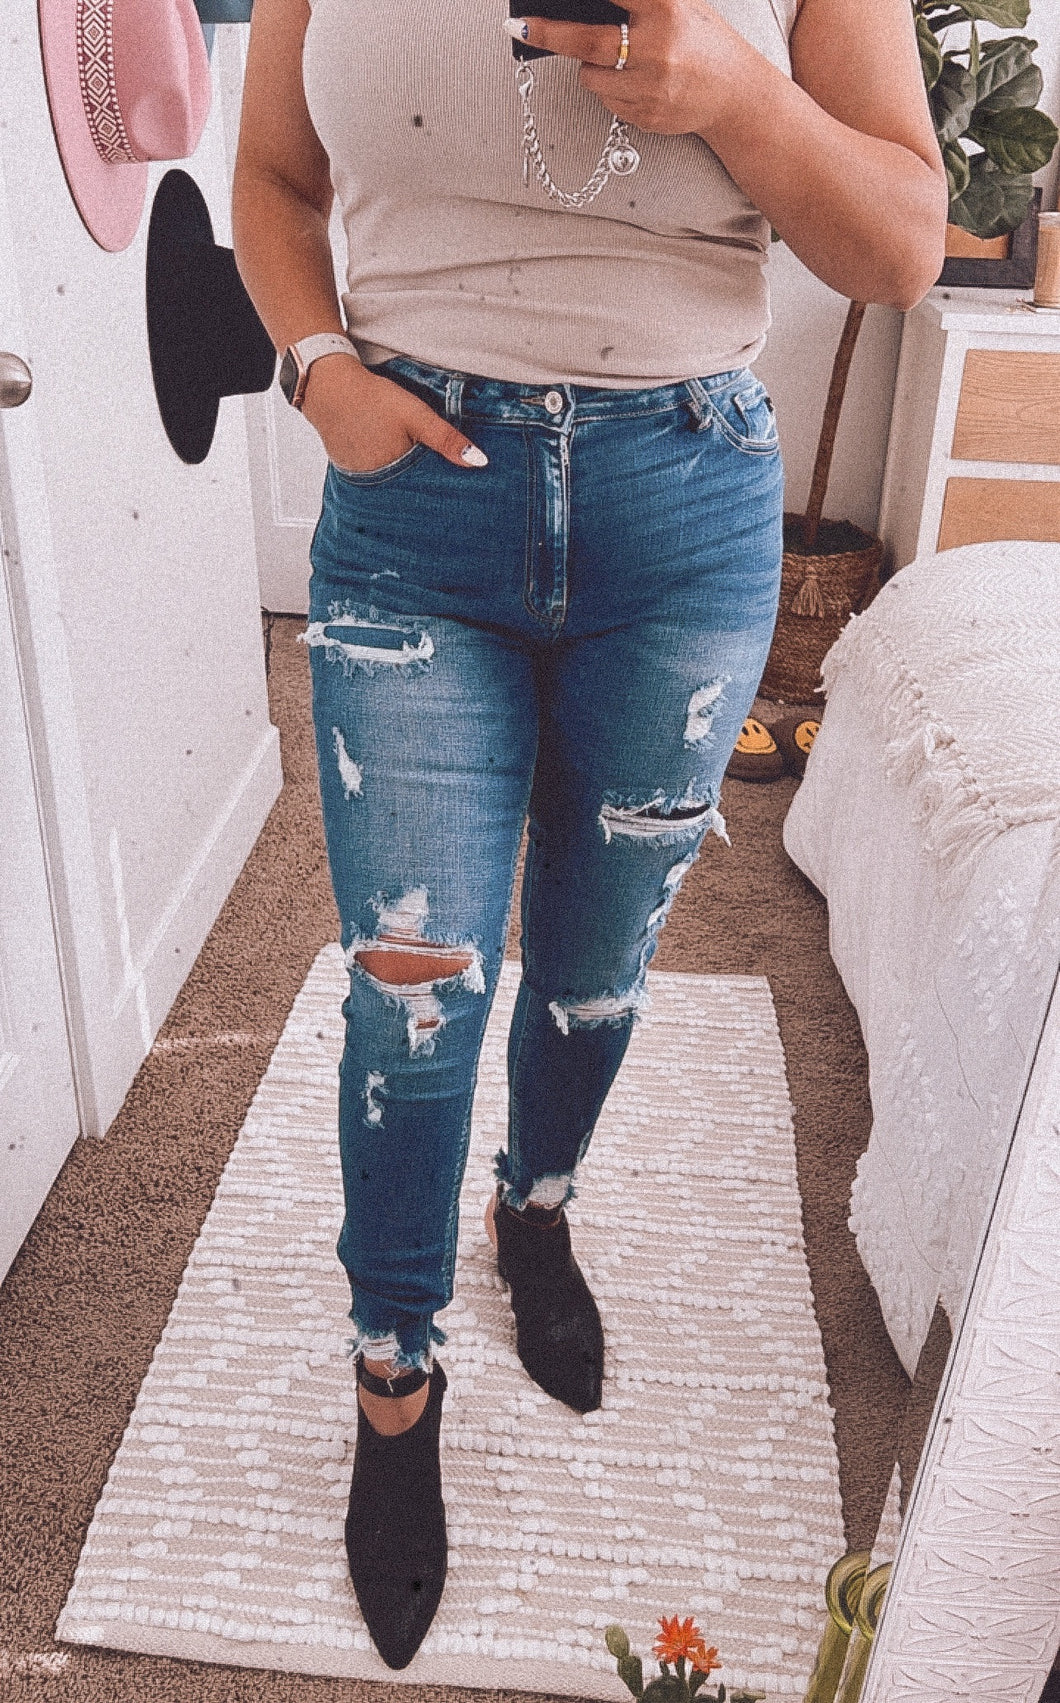 now or never high rise ankle skinny jeans